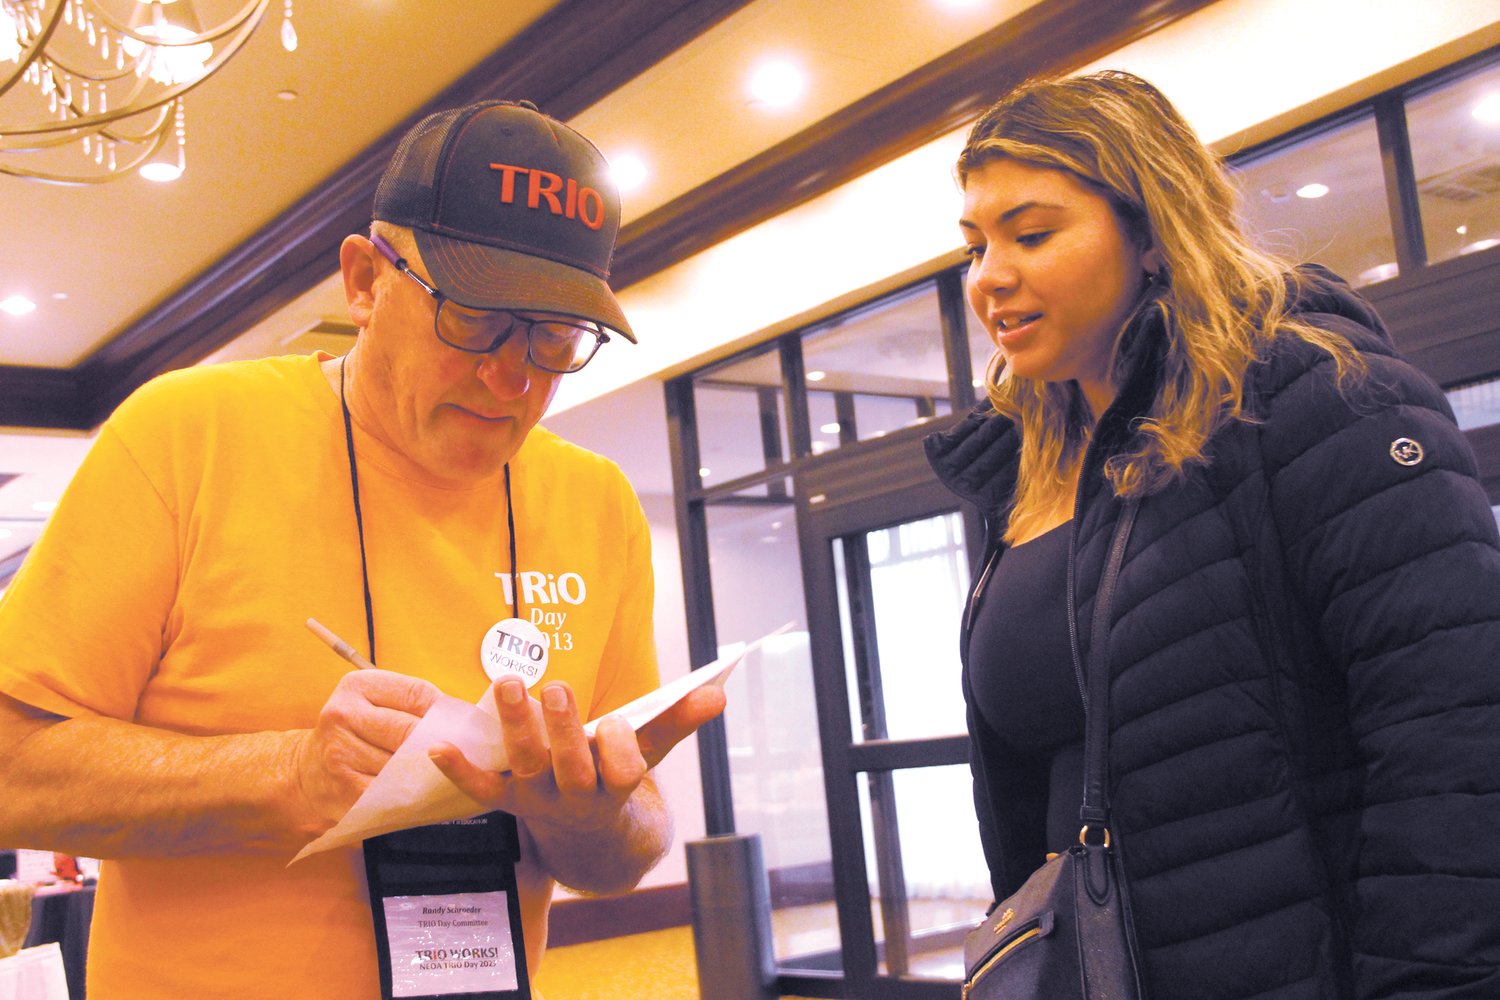 GETTING HER SQUARED AWAY:  Randy Schroeder, a member of the NEOA Board of Directors assists Semra Boluk in where she needs to set up as a representative for the University of Hartford.